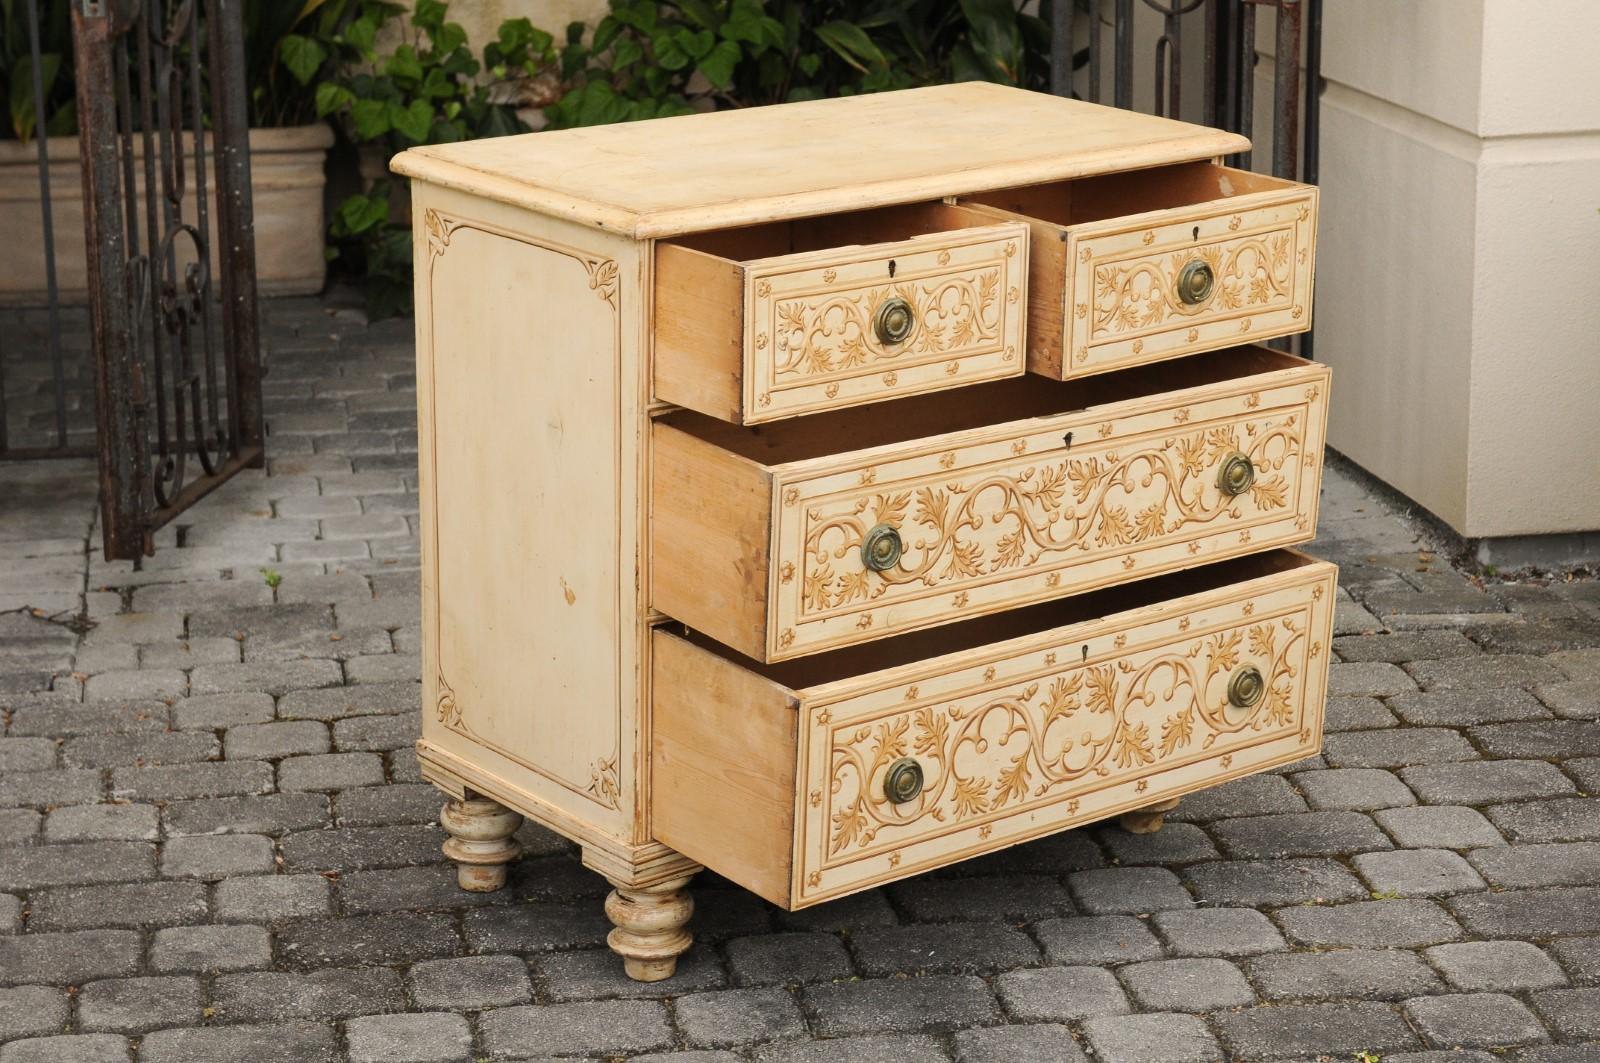 English Painted Wood Four-Drawer Commode with Scrollwork Motifs, circa 1880 For Sale 3